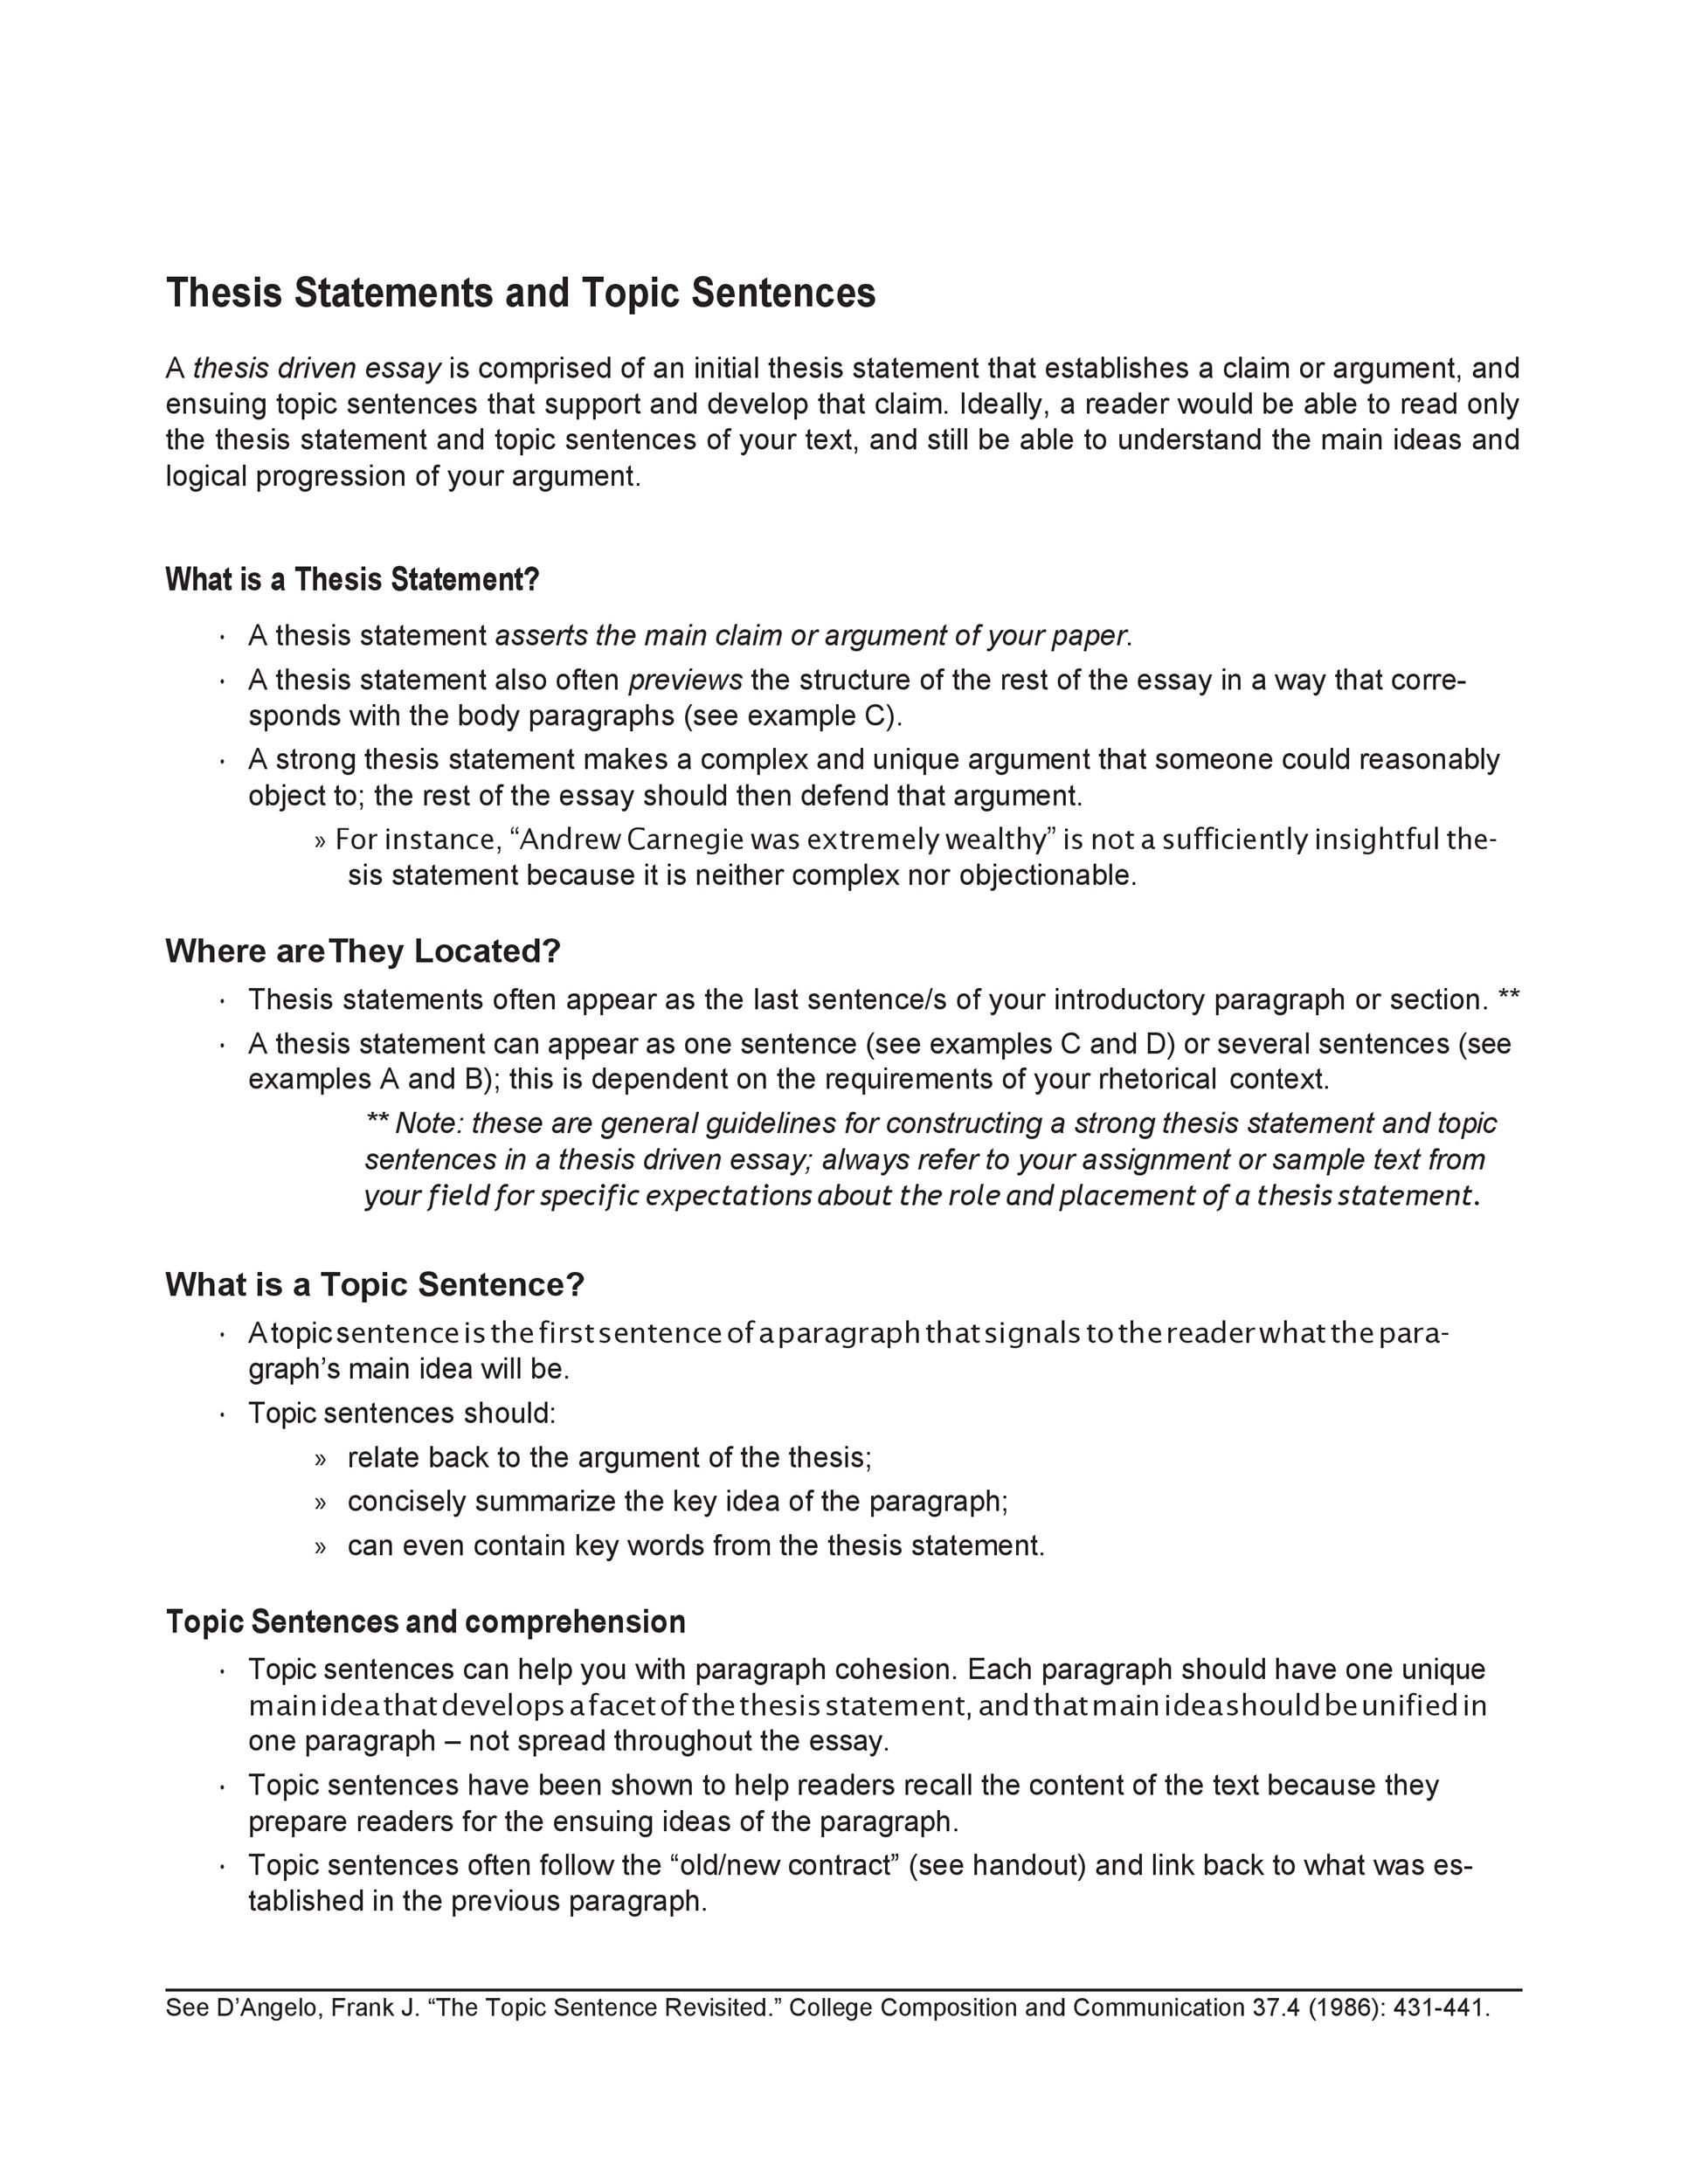 Free thesis statement template 05